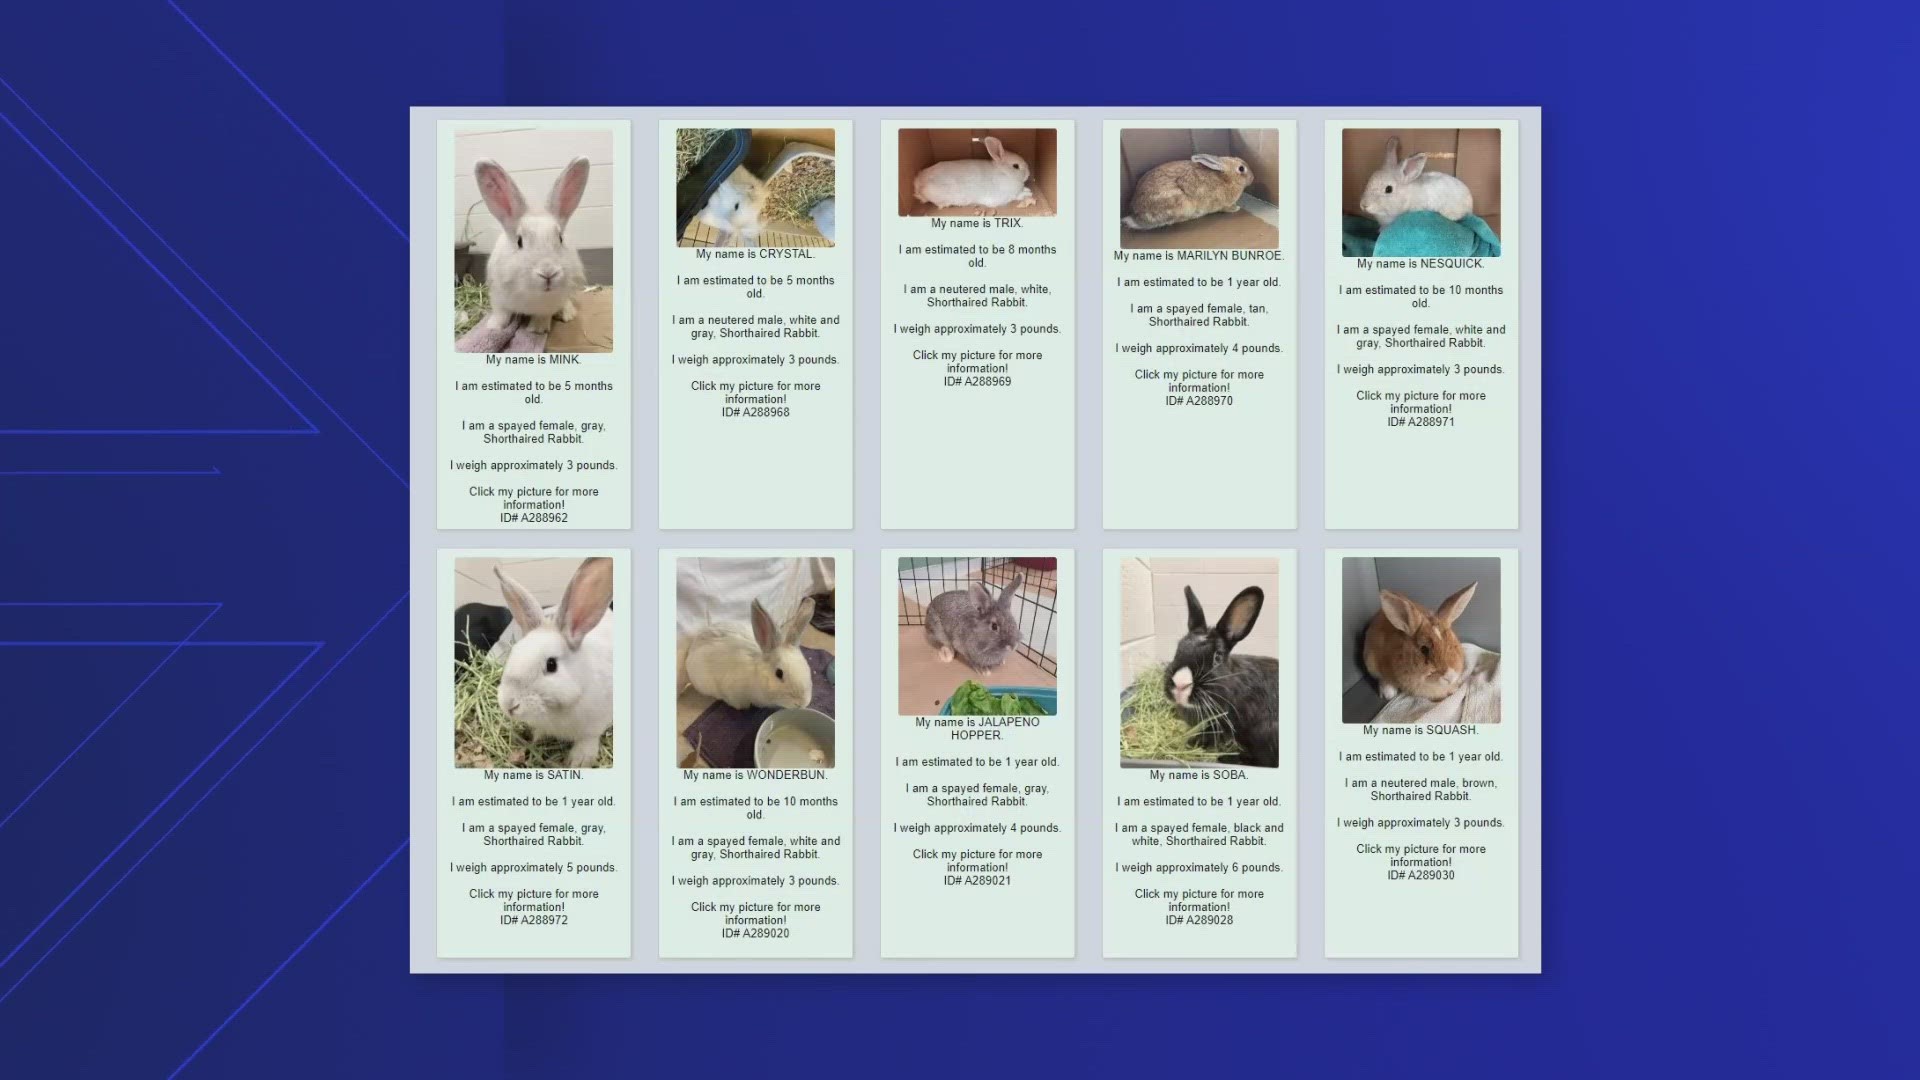 On Friday, April 5, LCAS said they received 43 rabbits, ranging from two days to two years old.